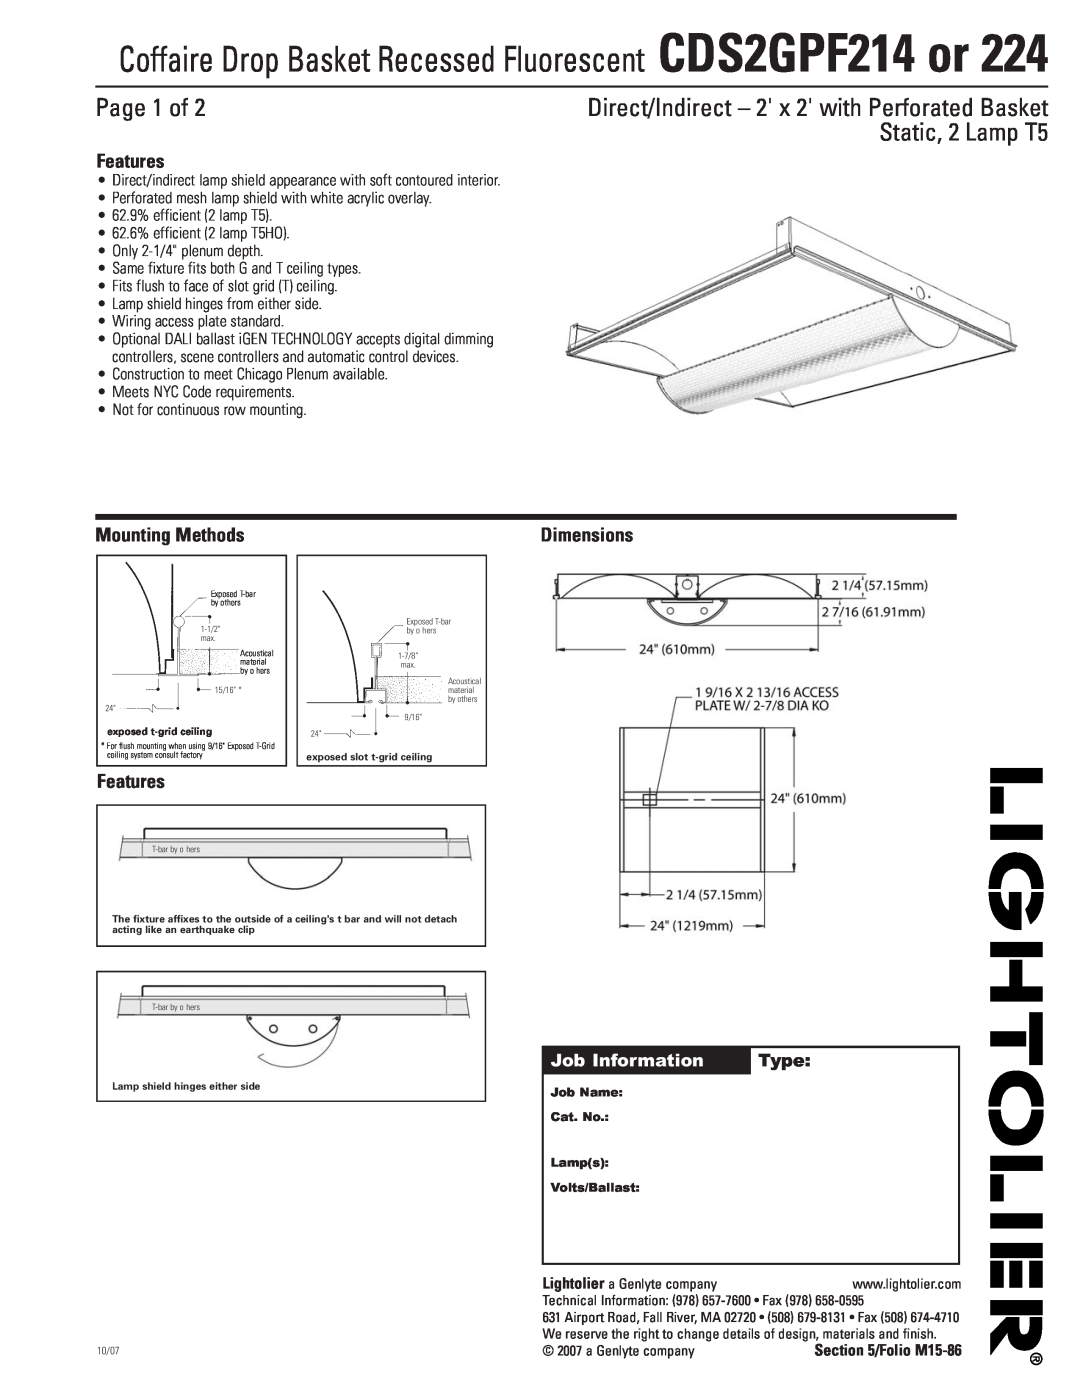 Lightolier CDS2GPF214 or 224 dimensions Page 1 of, Static, 2 Lamp T5, Direct/Indirect - 2 x 2 with Perforated Basket, Type 